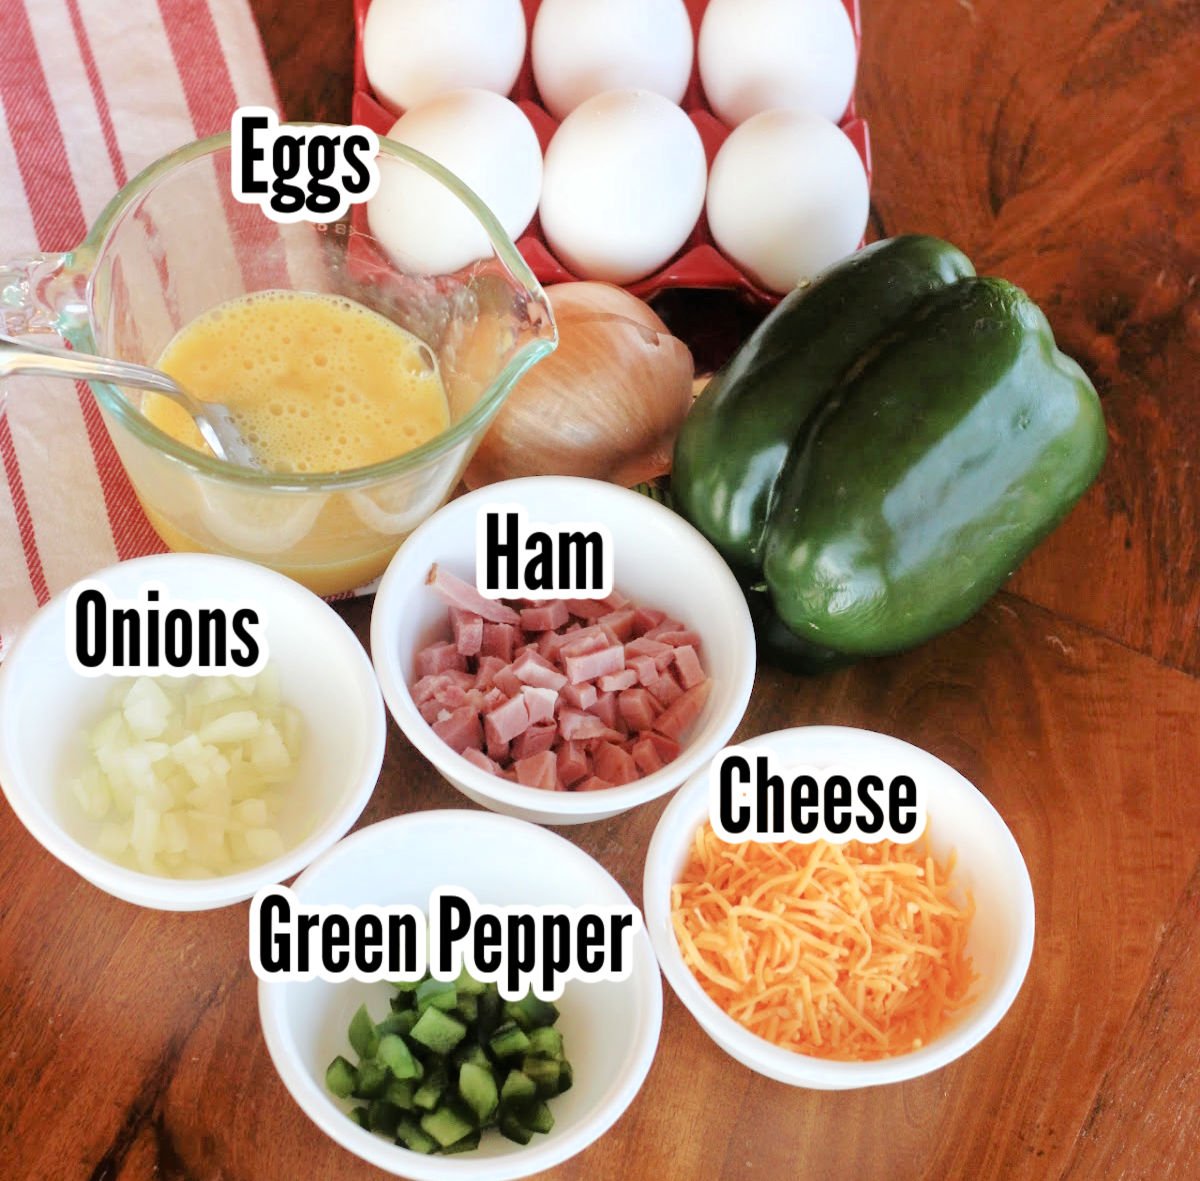 Western Sandwich ingredients including eggs, onions, ham, peppers and cheese.